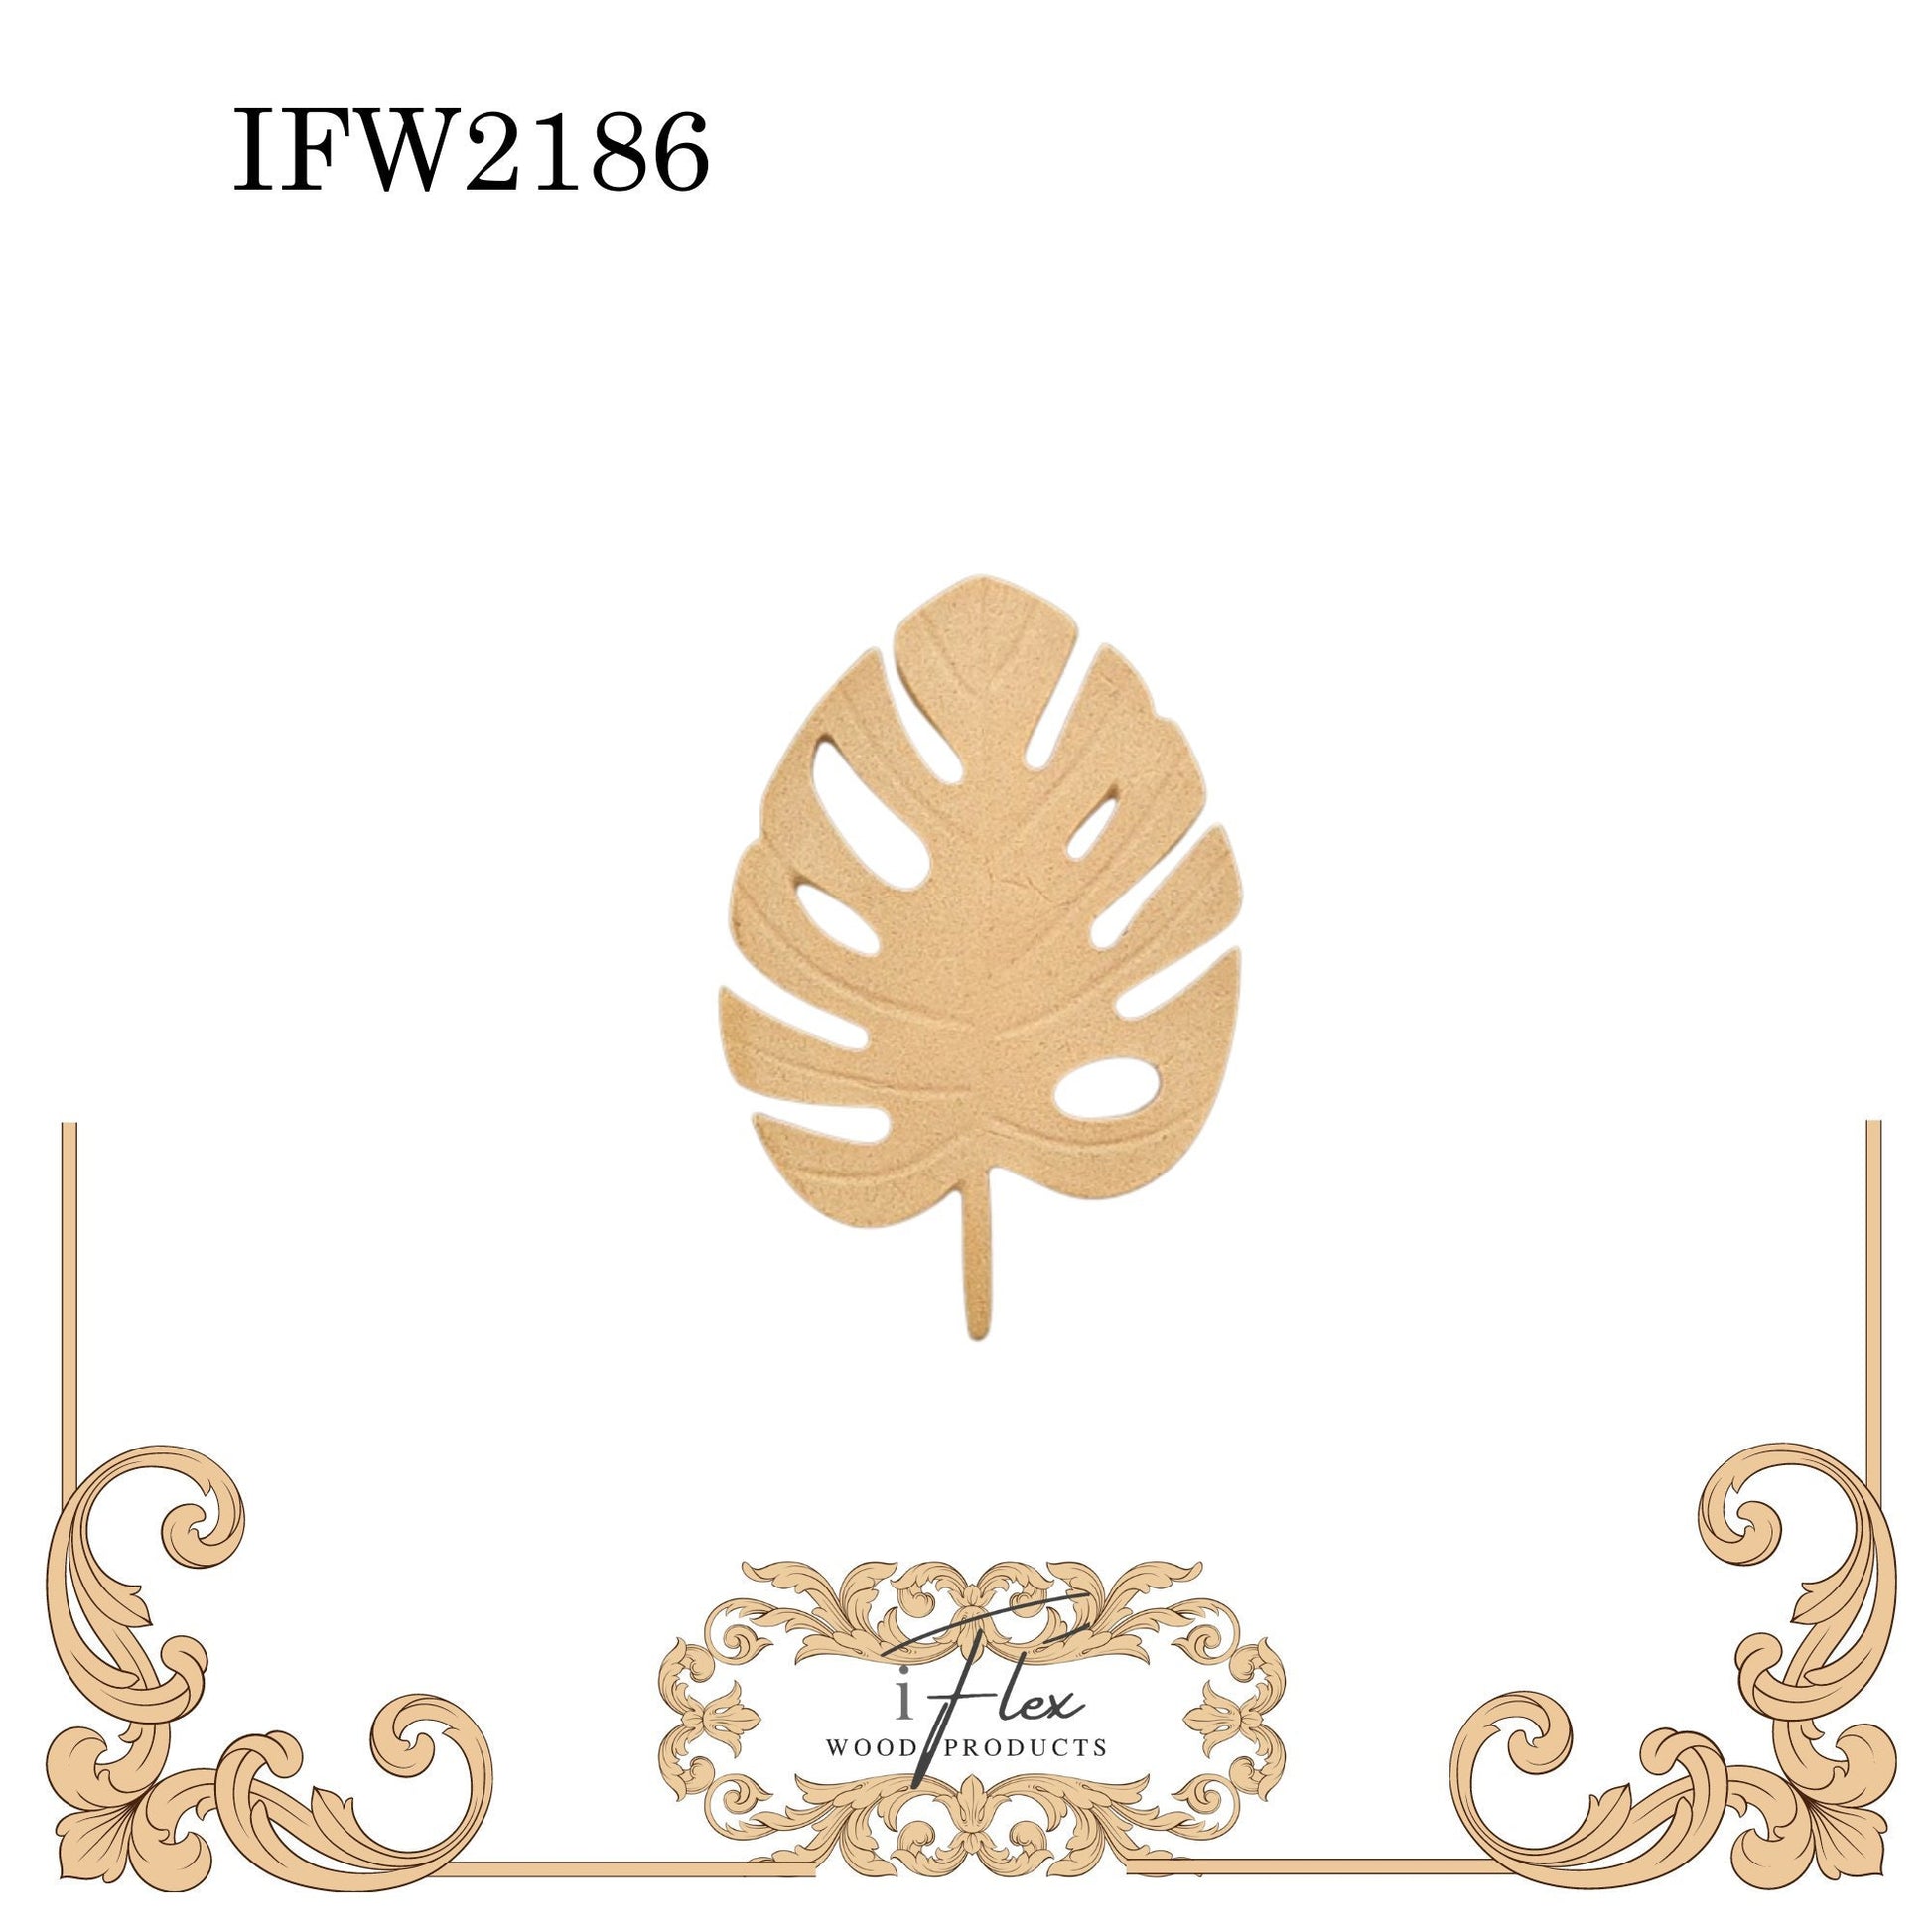 IFW 2186 iFlex Wood Products, bendable mouldings, flexible, wooden appliques, leaf, flower